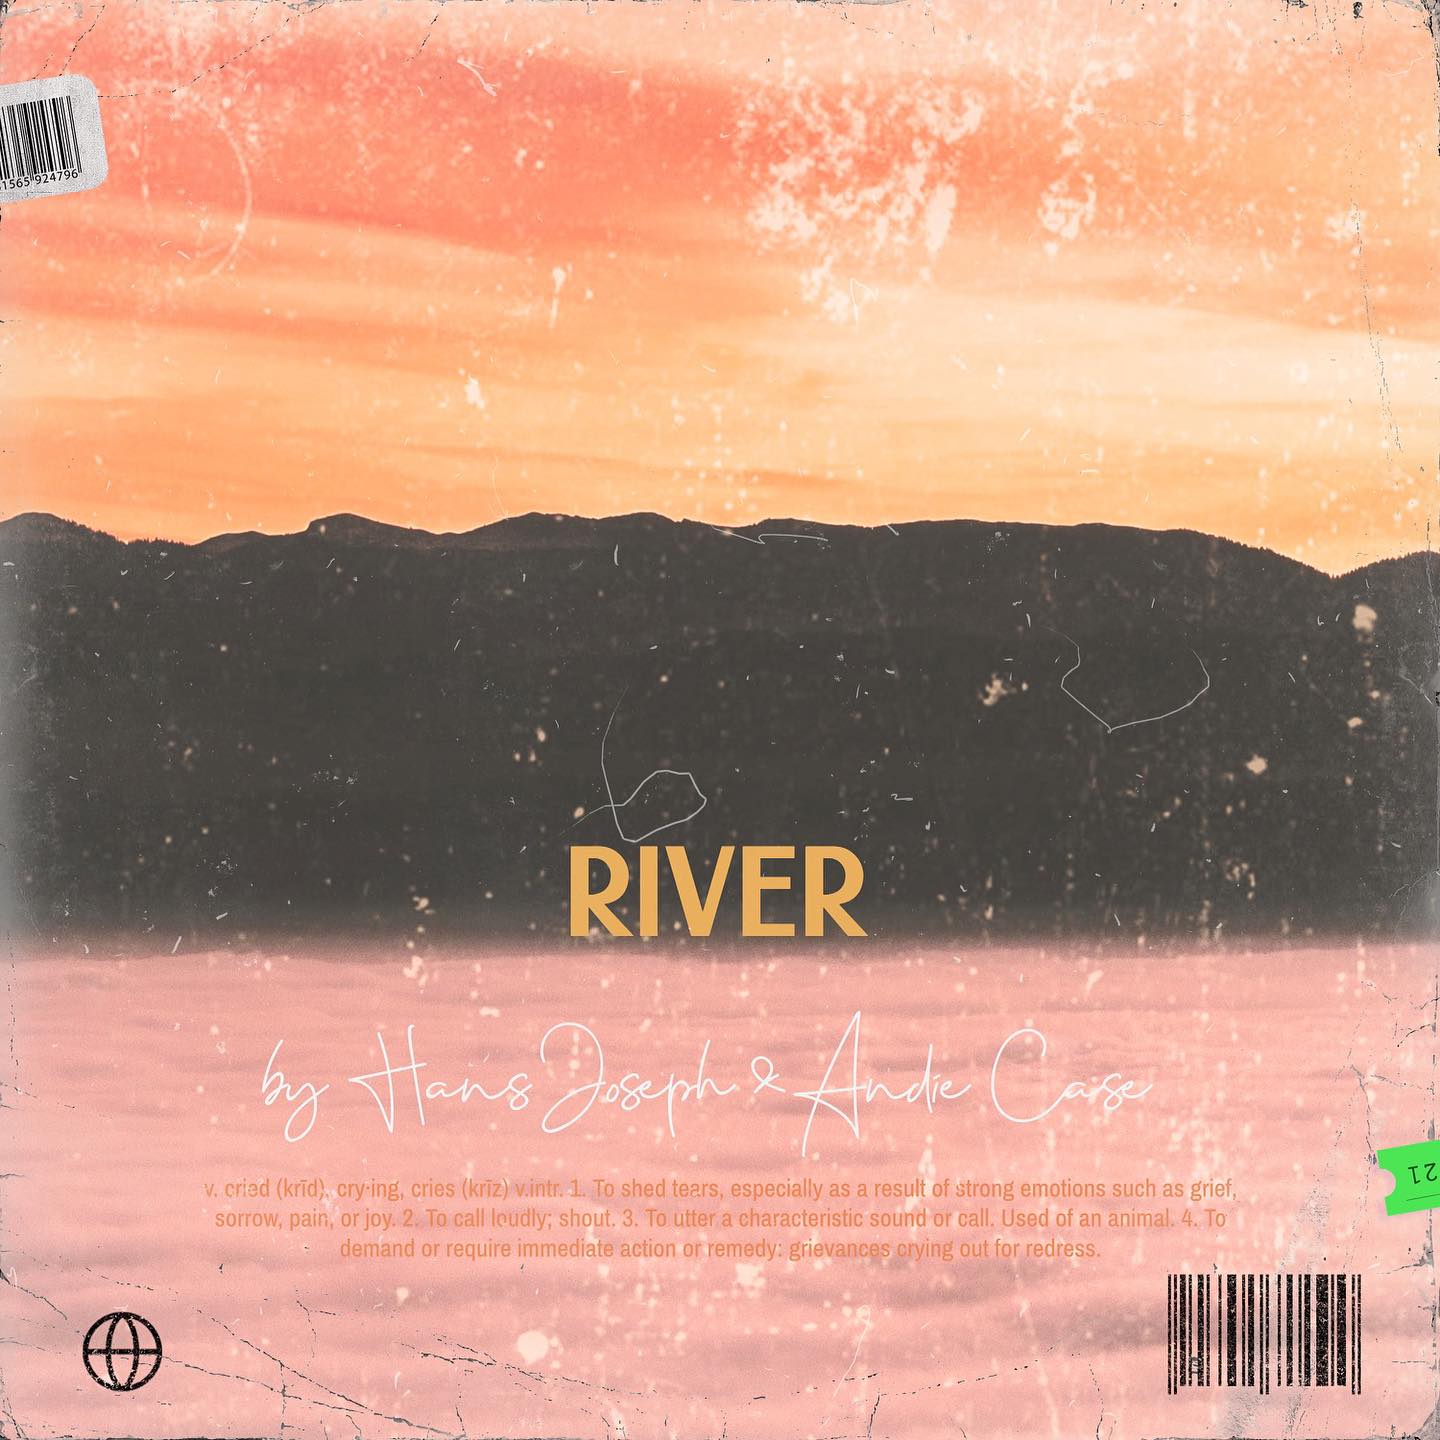 🚨New song🚨 #River is out at midnight with my incredibly talented amazing friend @hansjoseph__ !! We spent a week hanging, writing and documenting the vibes! Can’t wait for you to check it out!! 
Link in bio to pre save